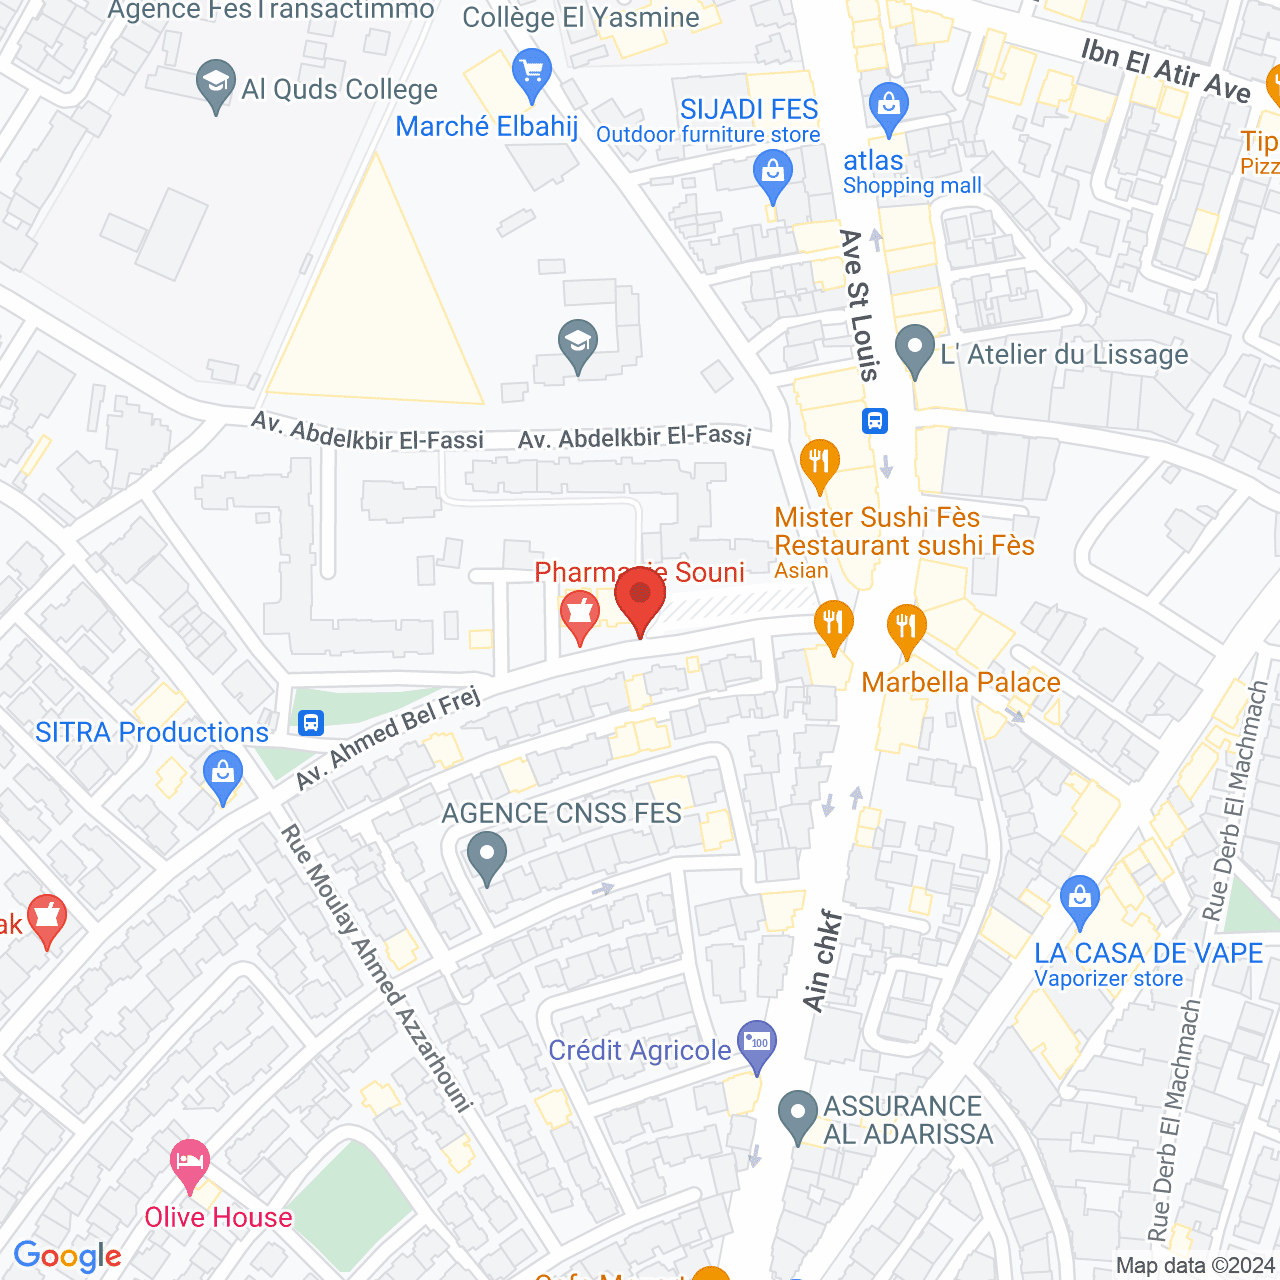 https://maps.googleapis.com/maps/api/staticmap?zoom=10&maptype=hybrid&scale=4&center=34.0181246,-5.0078451&markers=color:red%7C%7C34.0181246,-5.0078451&size=1000x1000&key=AIzaSyAQg6Liu52-a7wn17F9B-5c4QmJ9kTO3Mo